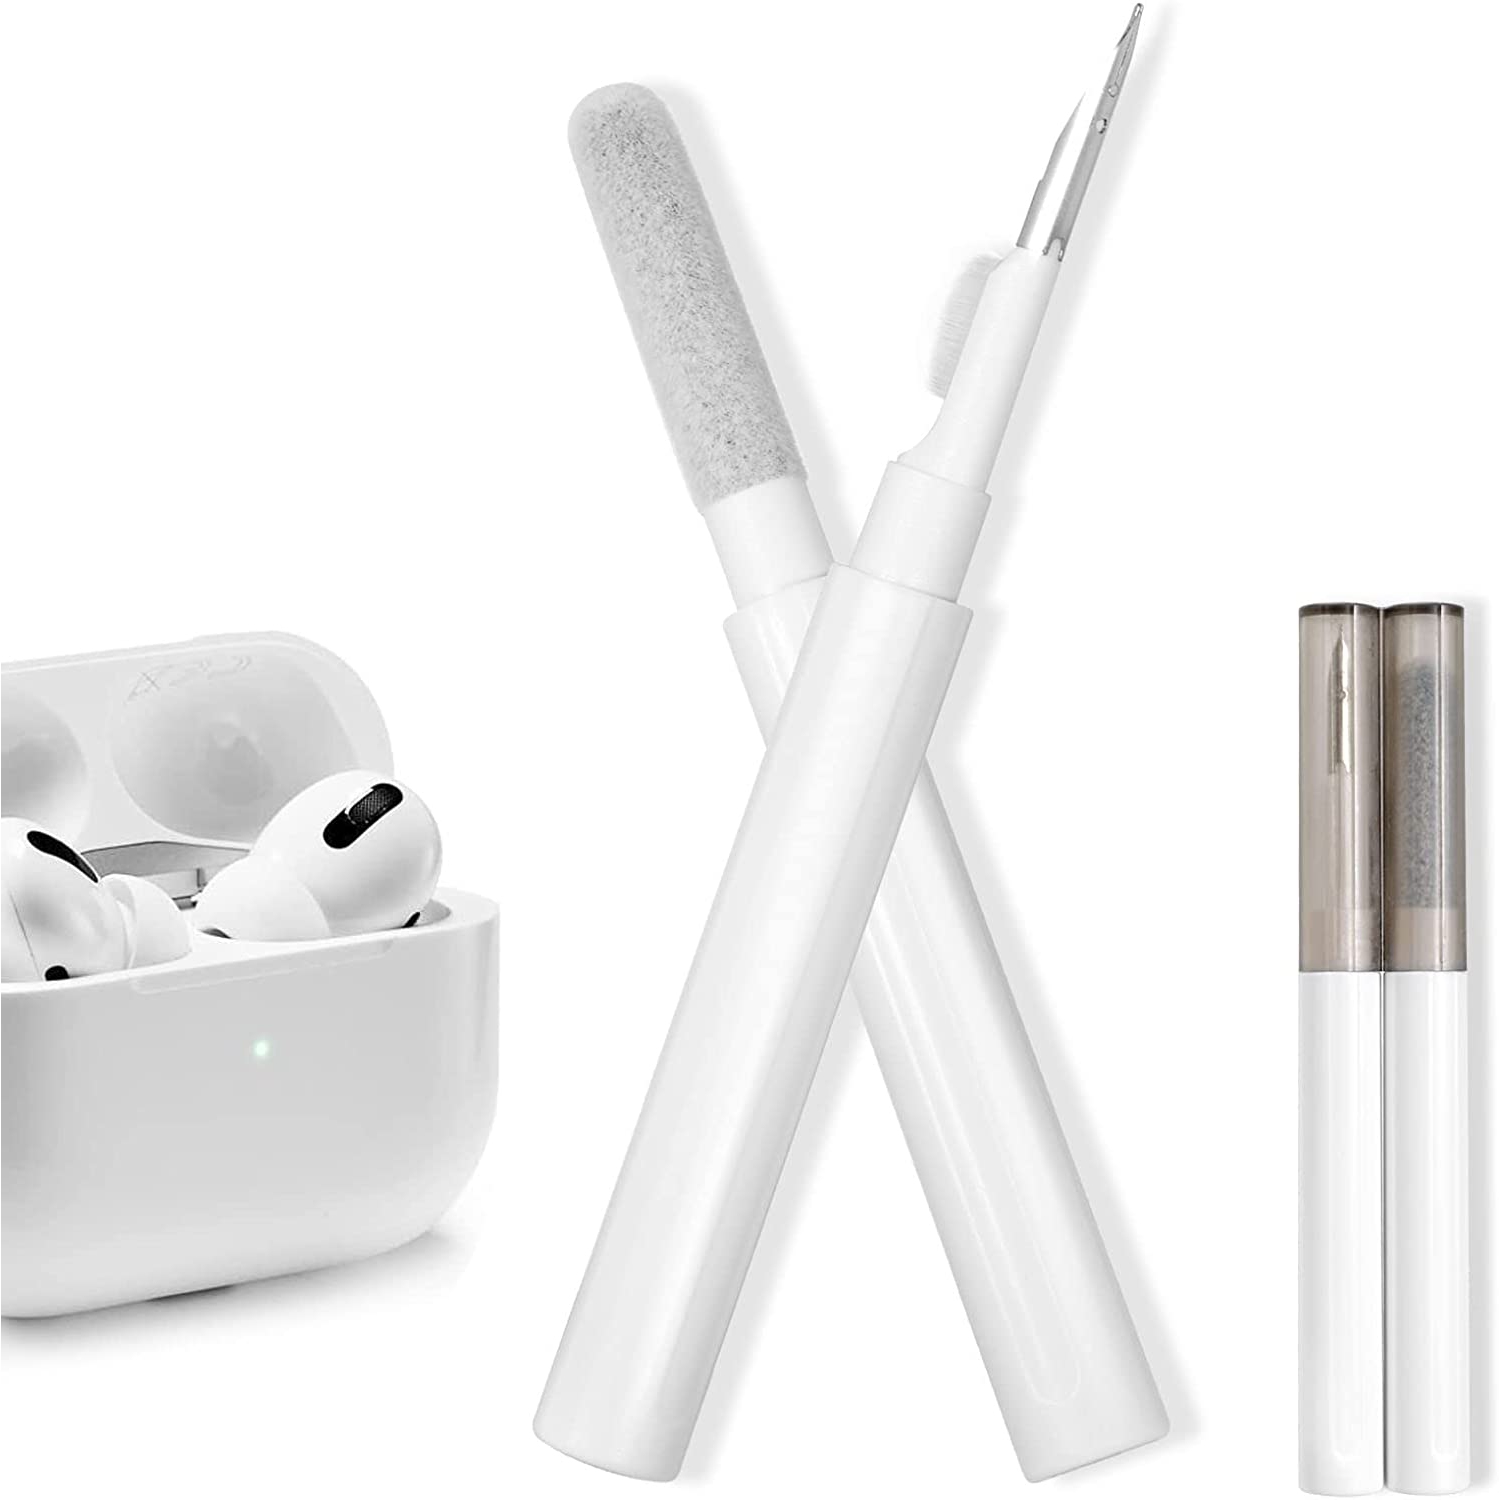 Airpods Cleaning Kit, Multifunctional Airpod Brush Earphone Cleaning Pen, Double Pen Earphone Cleaner Kit with Soft Brush for PC Laptop Airpods Pro Camera Earbud Mobile Phone Keybo